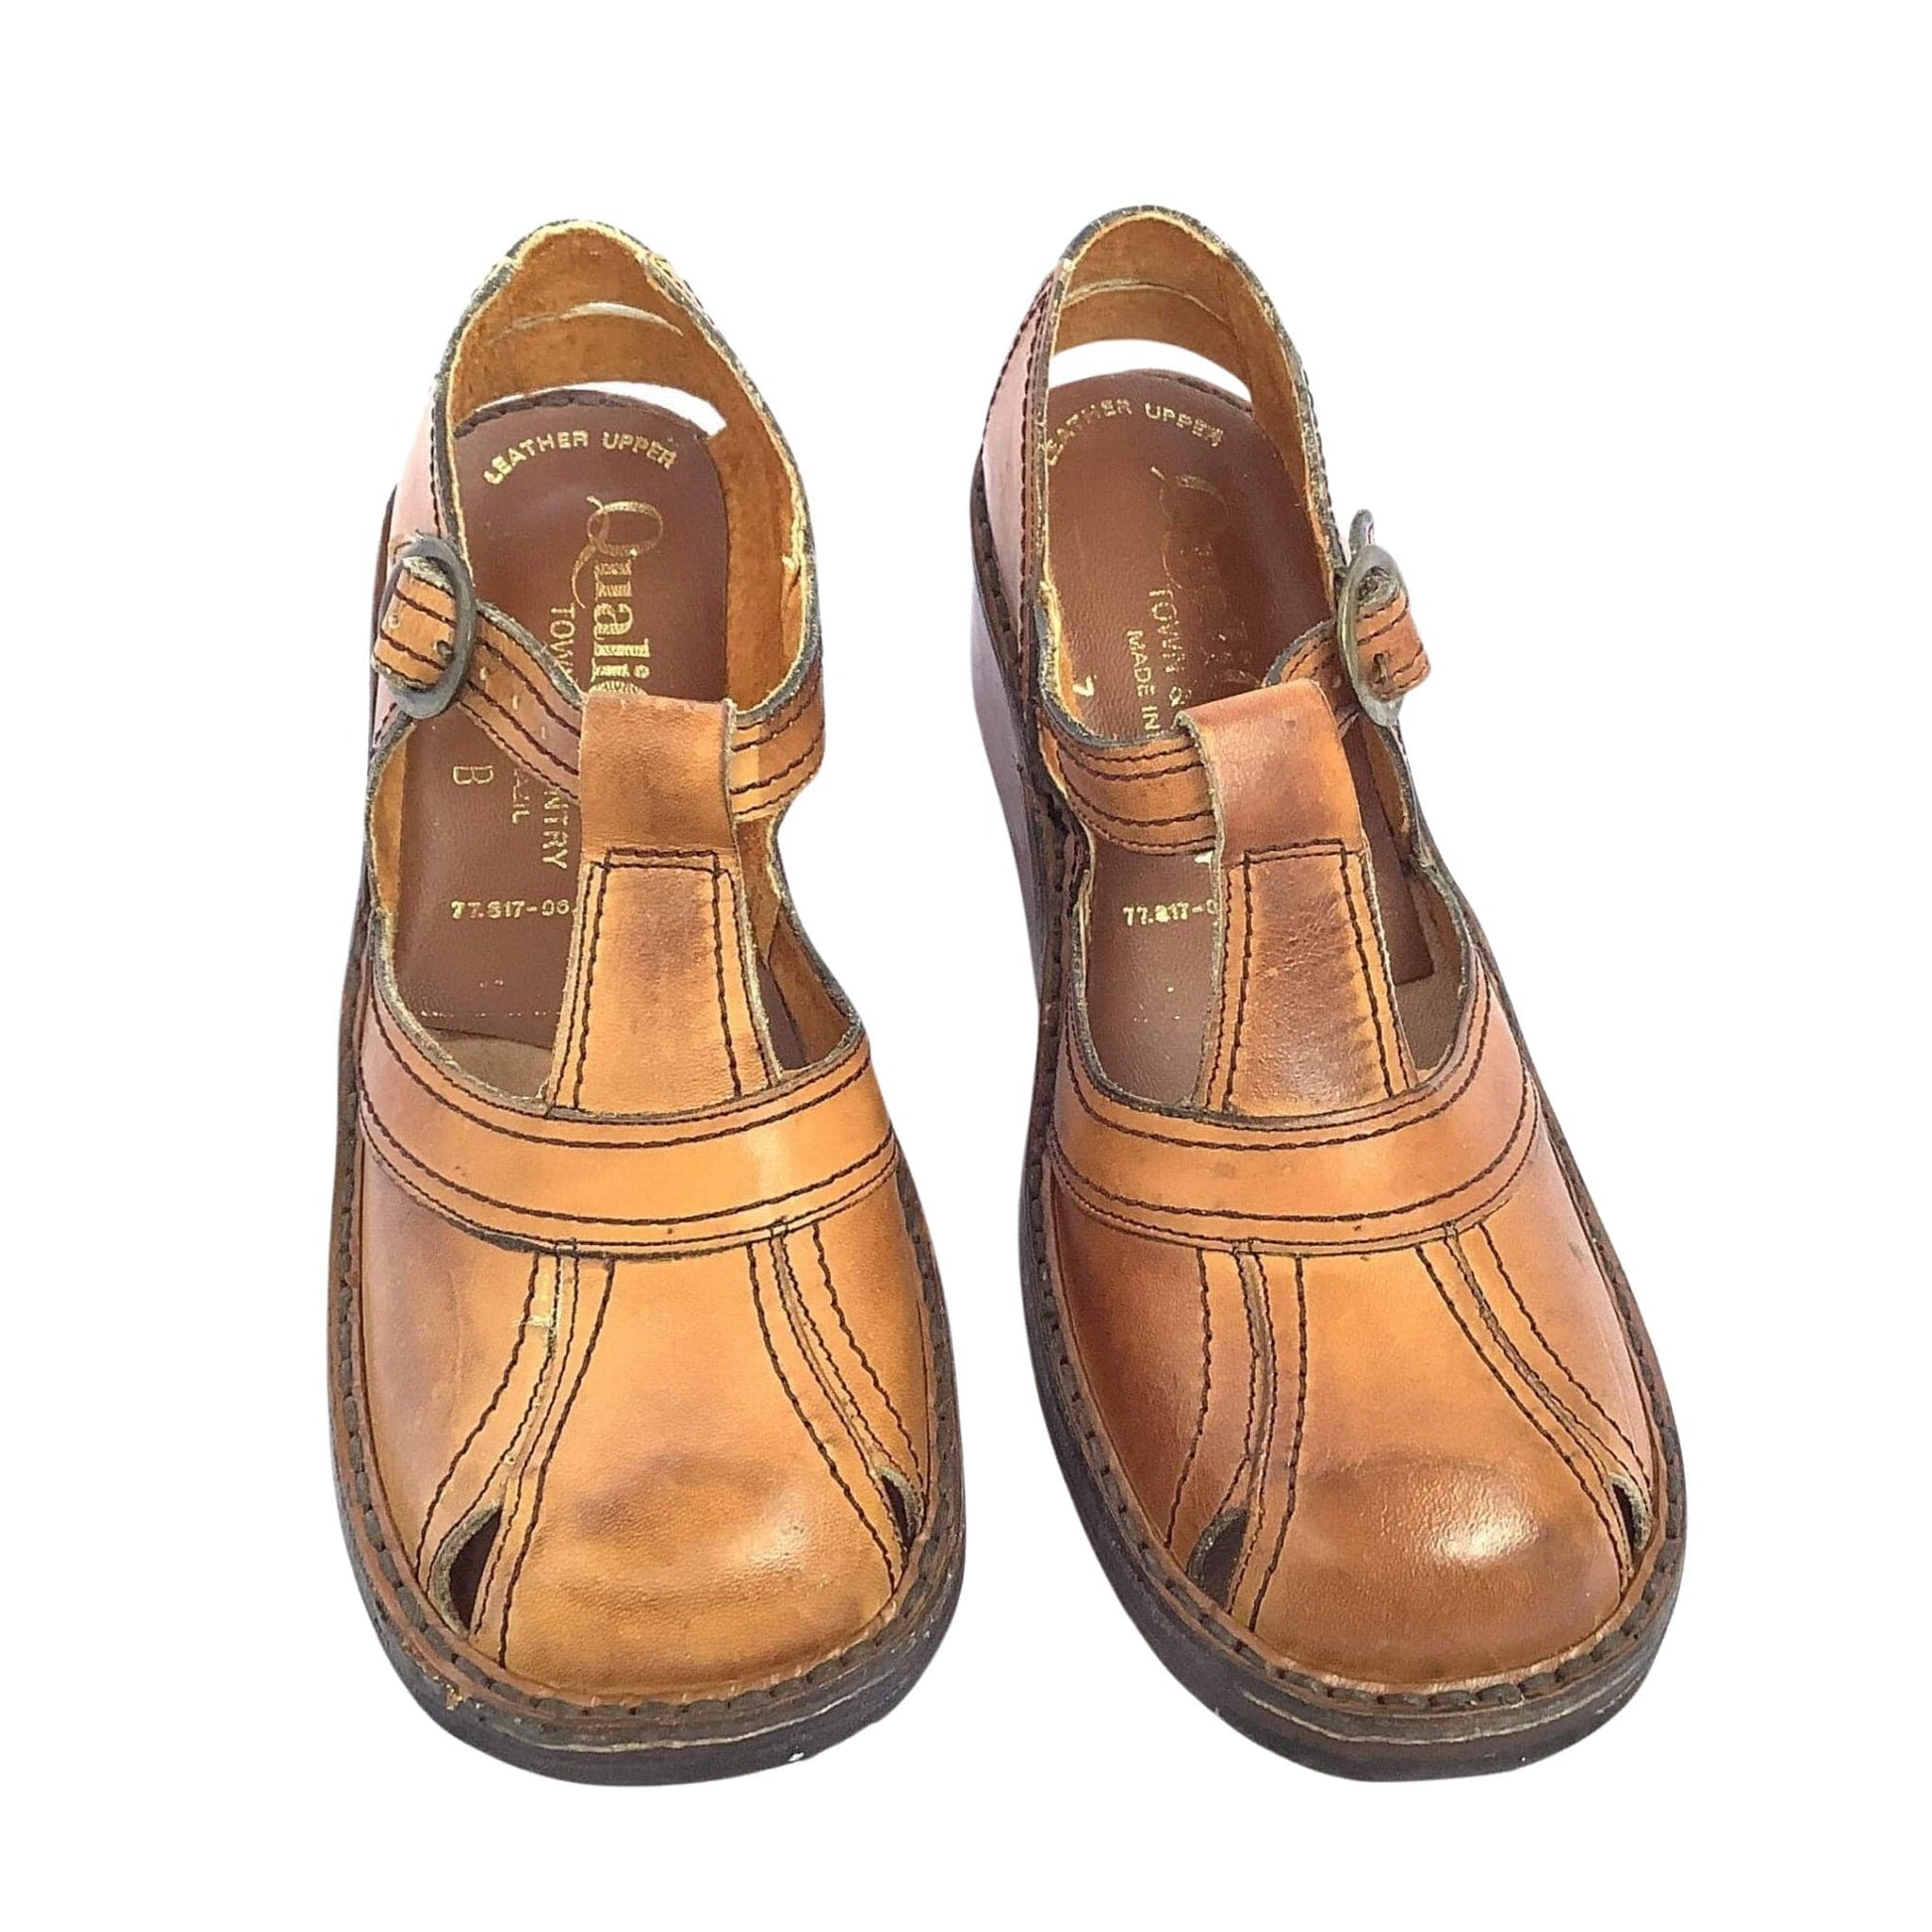 1970s Chunky Mary Jane Shoes 6.5 / Tan / Vintage 1970s